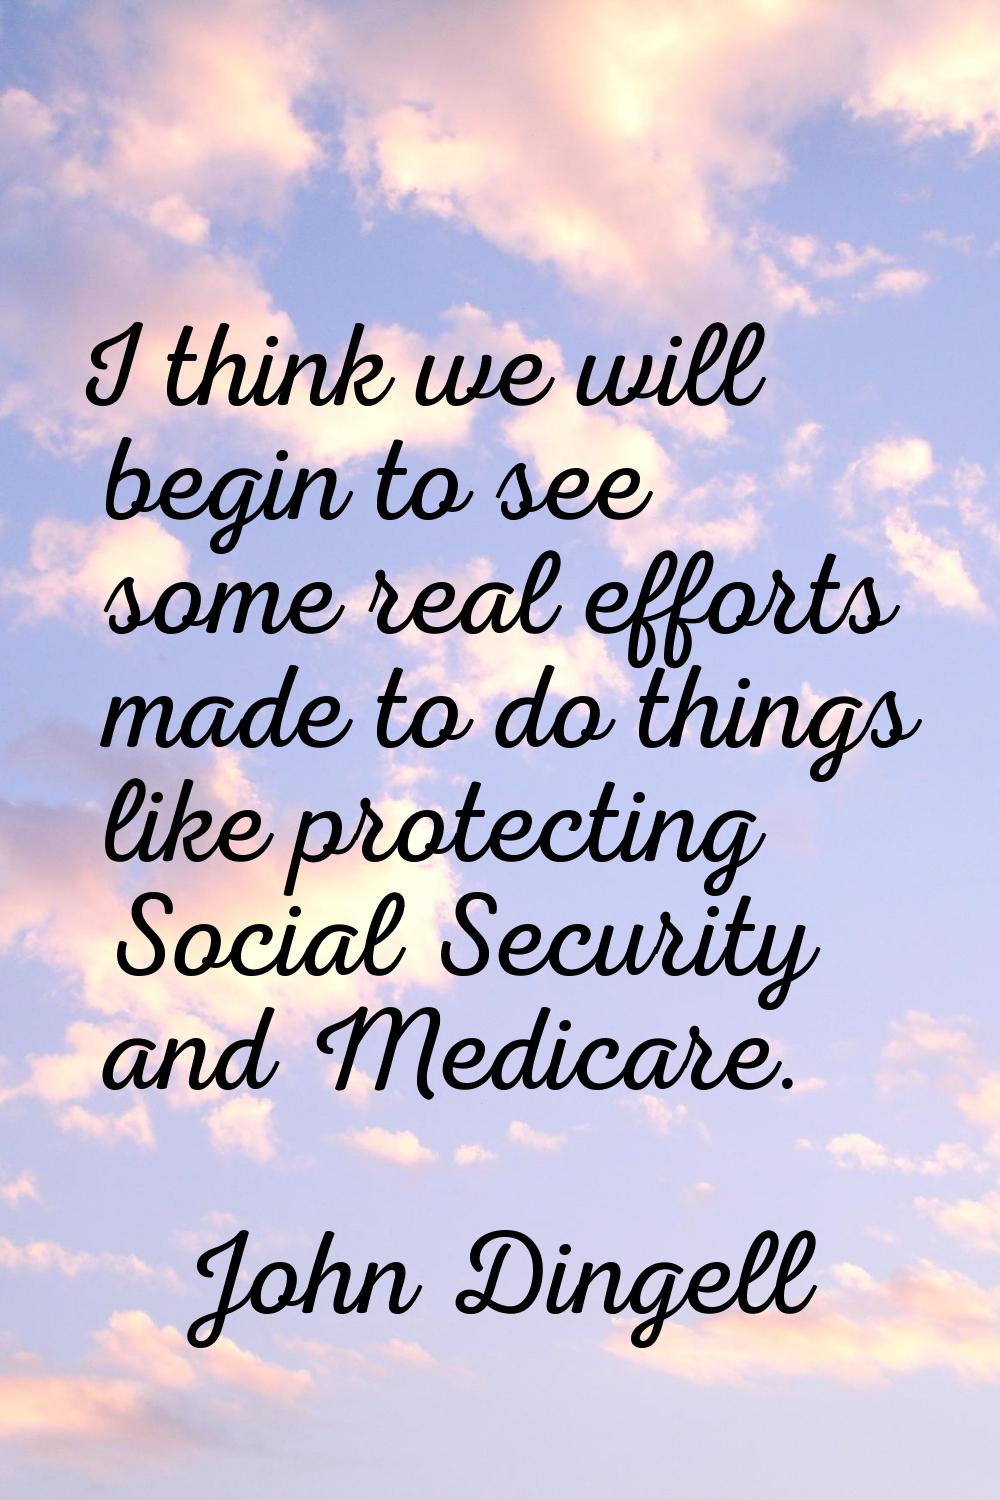 I think we will begin to see some real efforts made to do things like protecting Social Security an